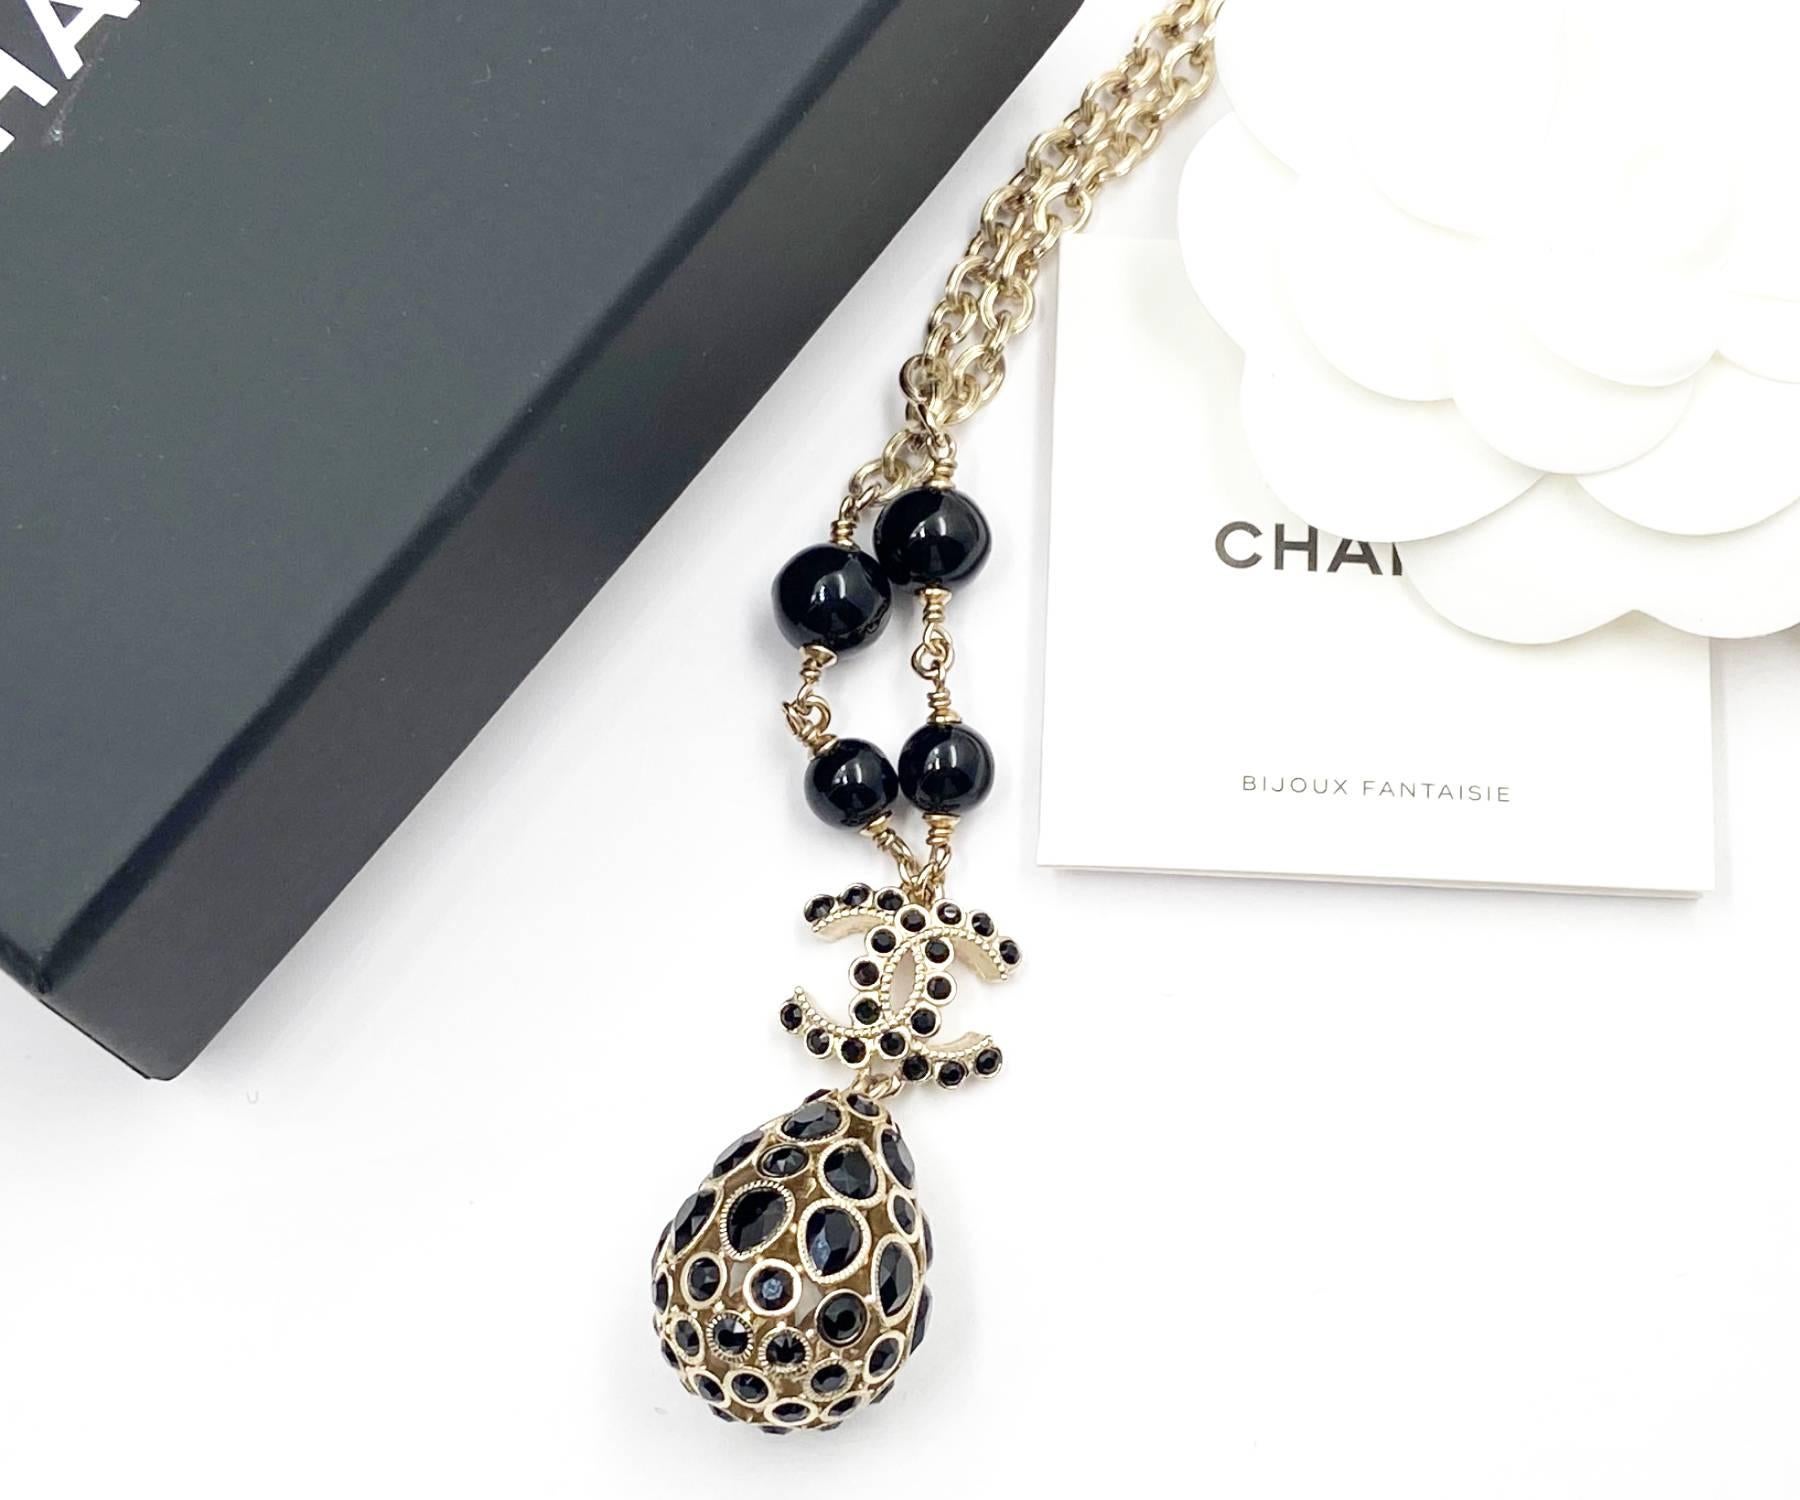 Chanel Brand New Gold CC Black Stone Crystal Tear Drop Pendant Necklace

*Marked 20
*Made in France
*Comes with the original box, pouch, booklet, camellia and ribbon
*Brand New

-It's approximately 18 to 22